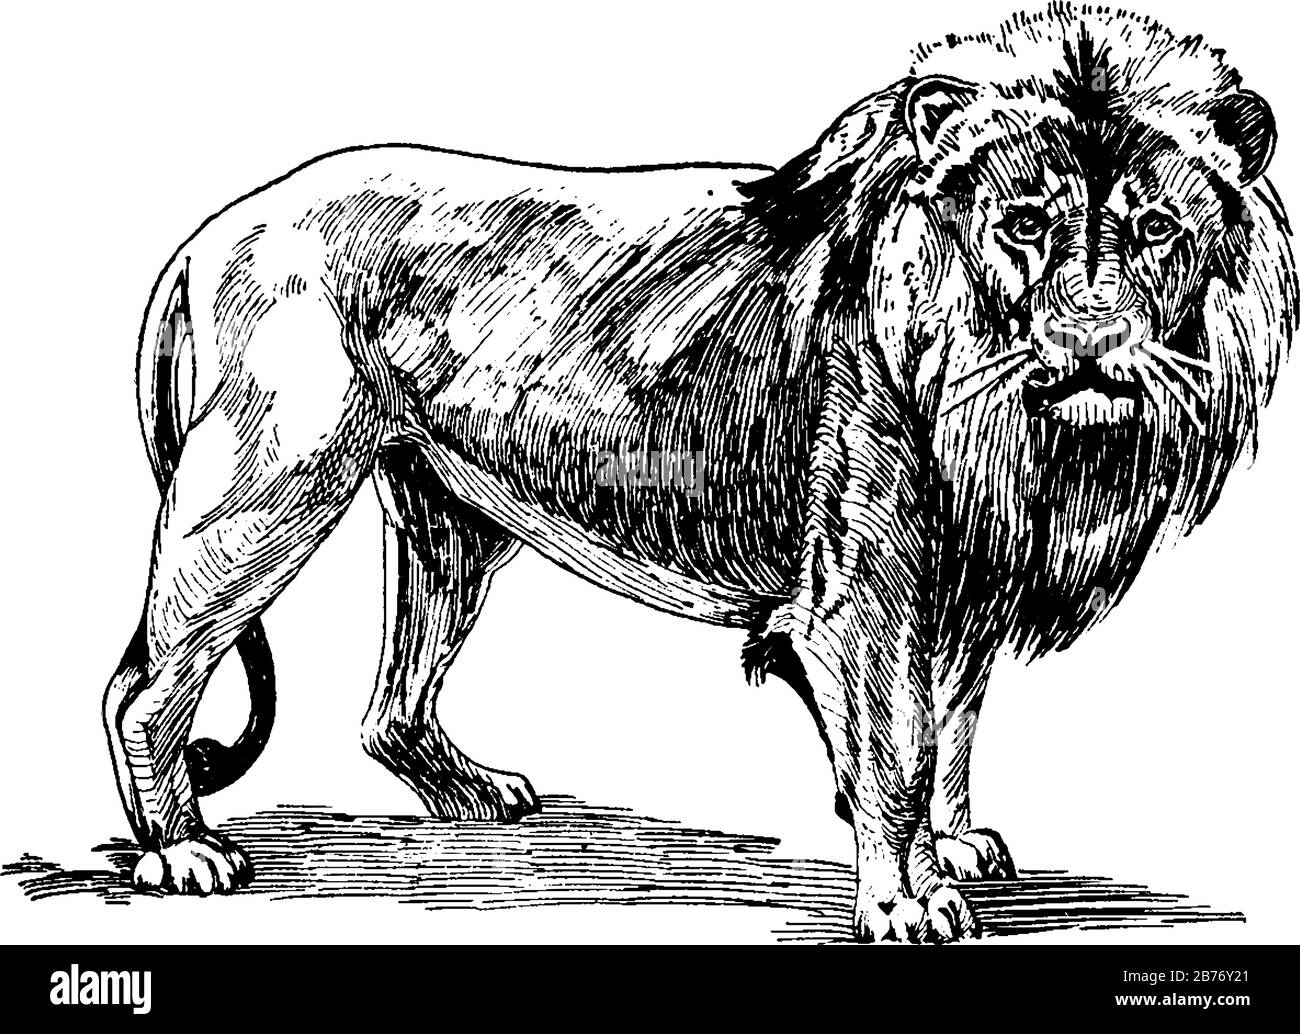 Panthera leo species, a muscular, deep-chested cat with a short, rounded head, a reduced neck and round ears, and a hairy tuft at the end of its tail, Stock Vector